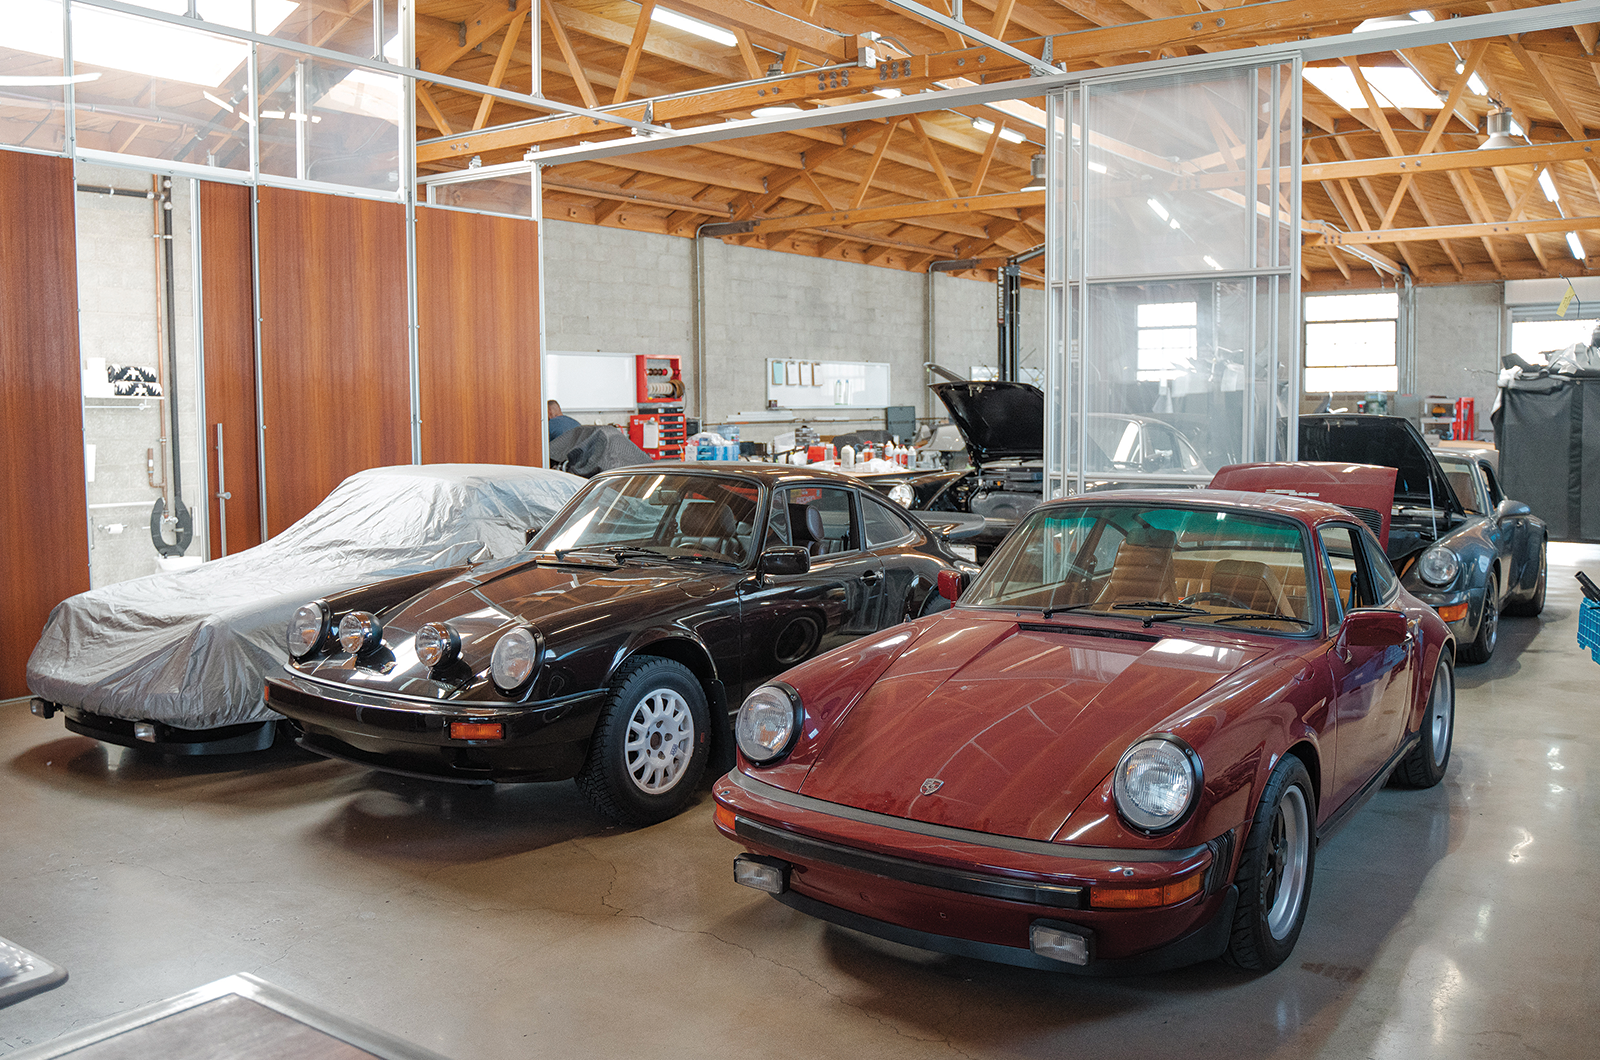 Classic & Sports Car – The specialist: Workshop 5001